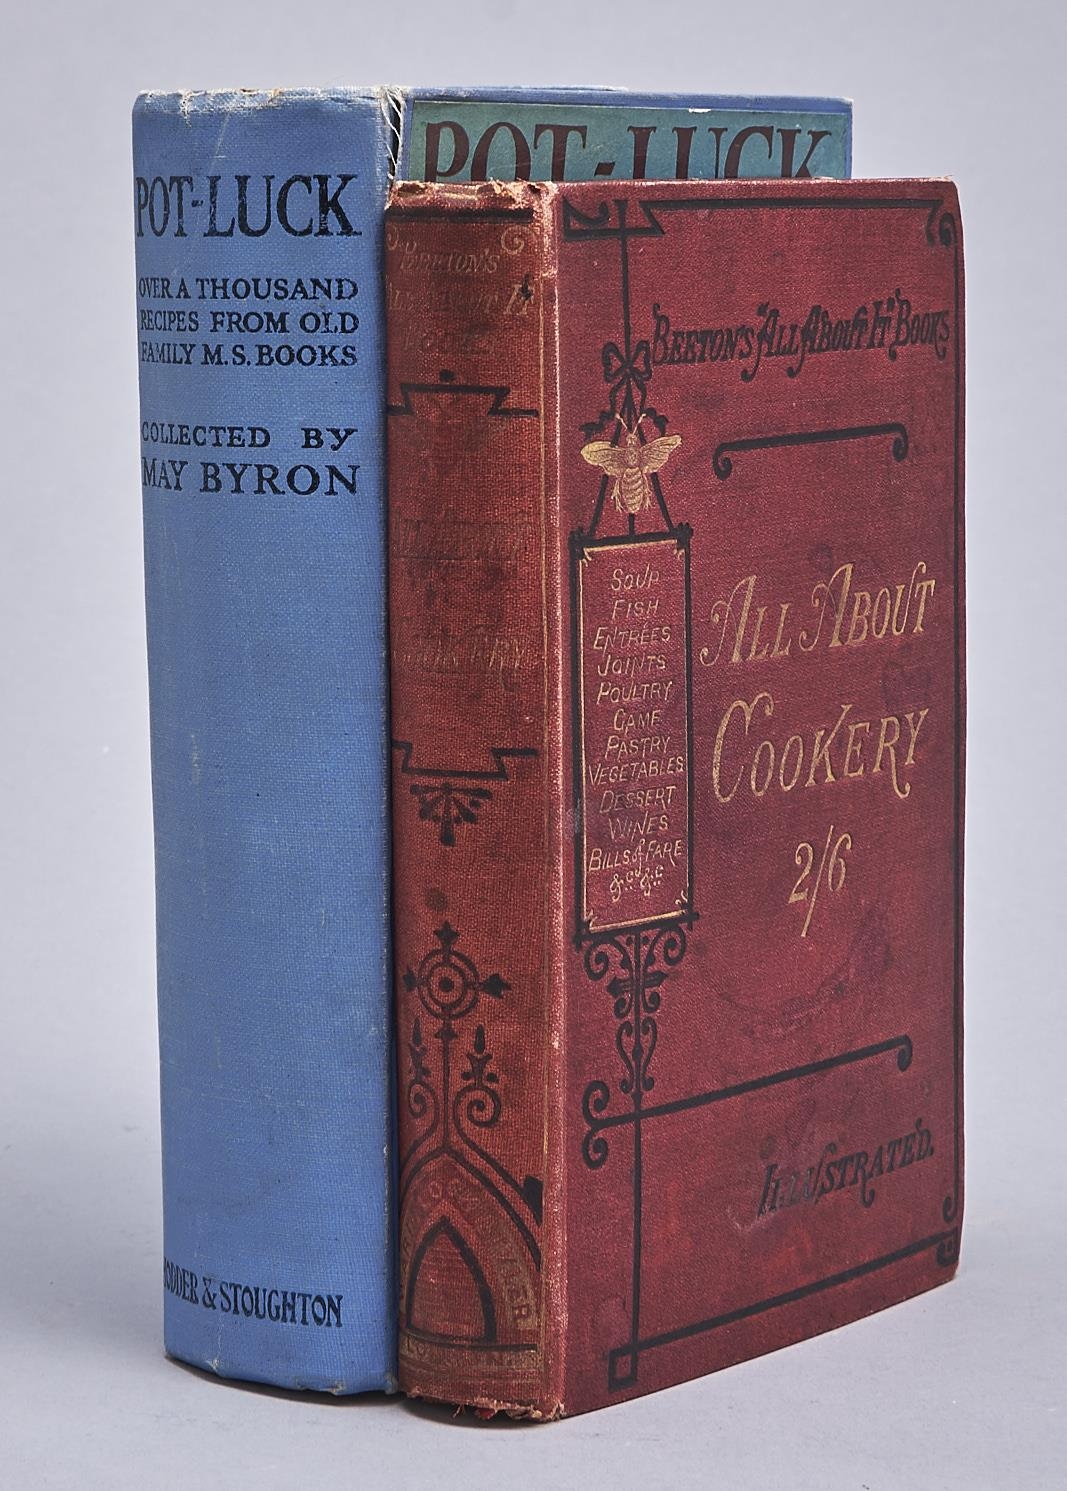 Byron (May) - Pot-Luck or The British Home Cookery Book, half title, colour pictorial cover,